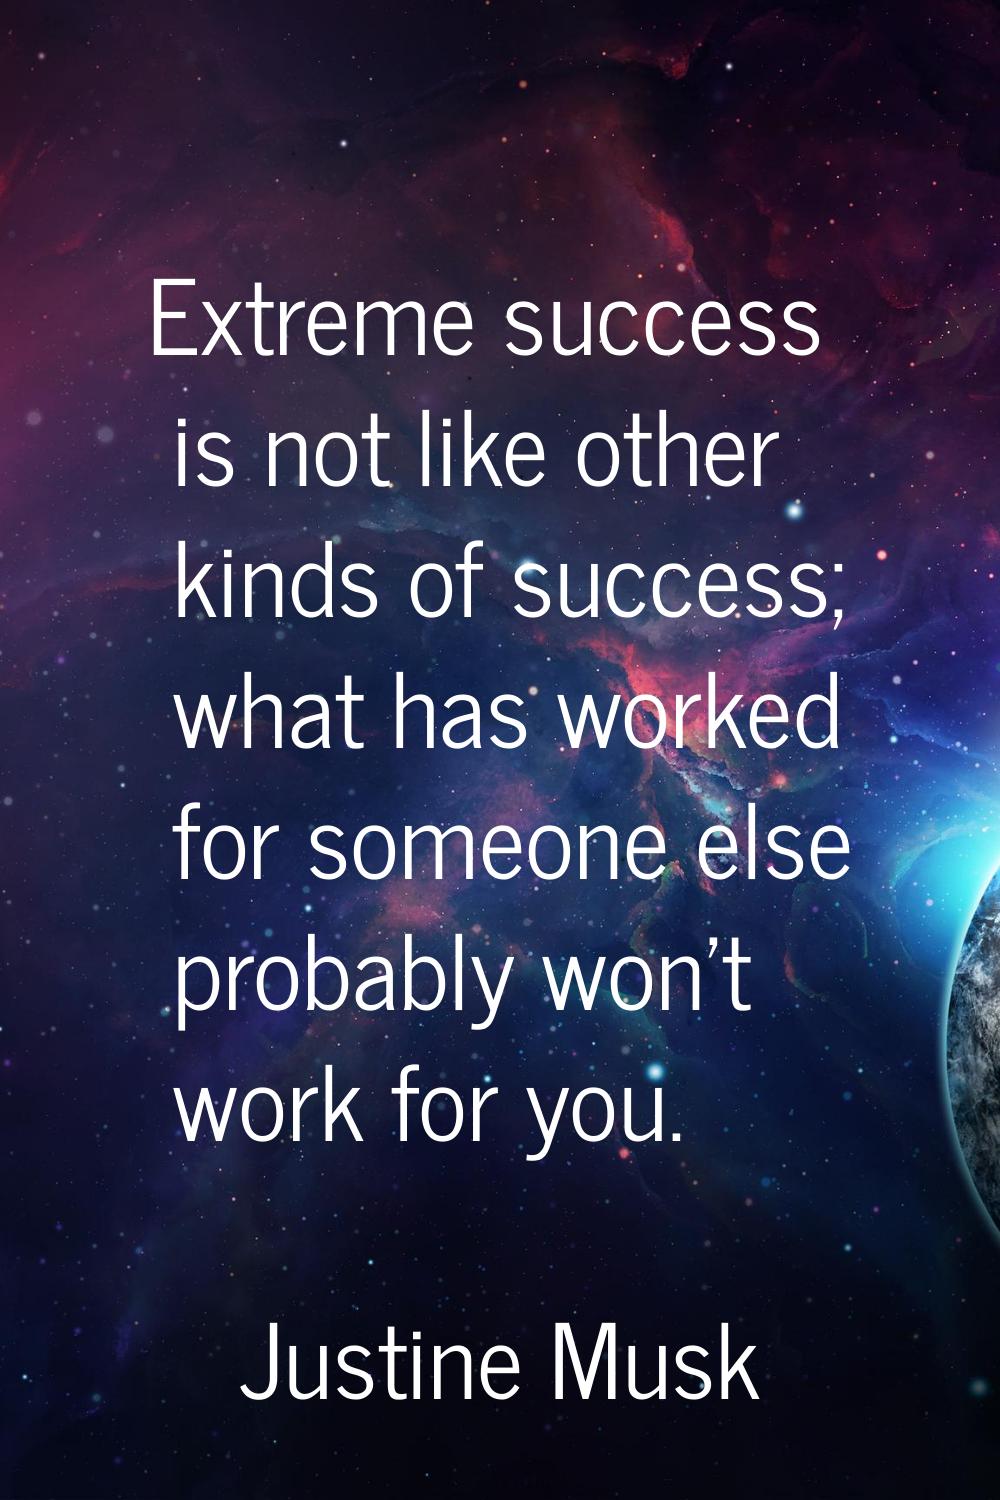 Extreme success is not like other kinds of success; what has worked for someone else probably won't